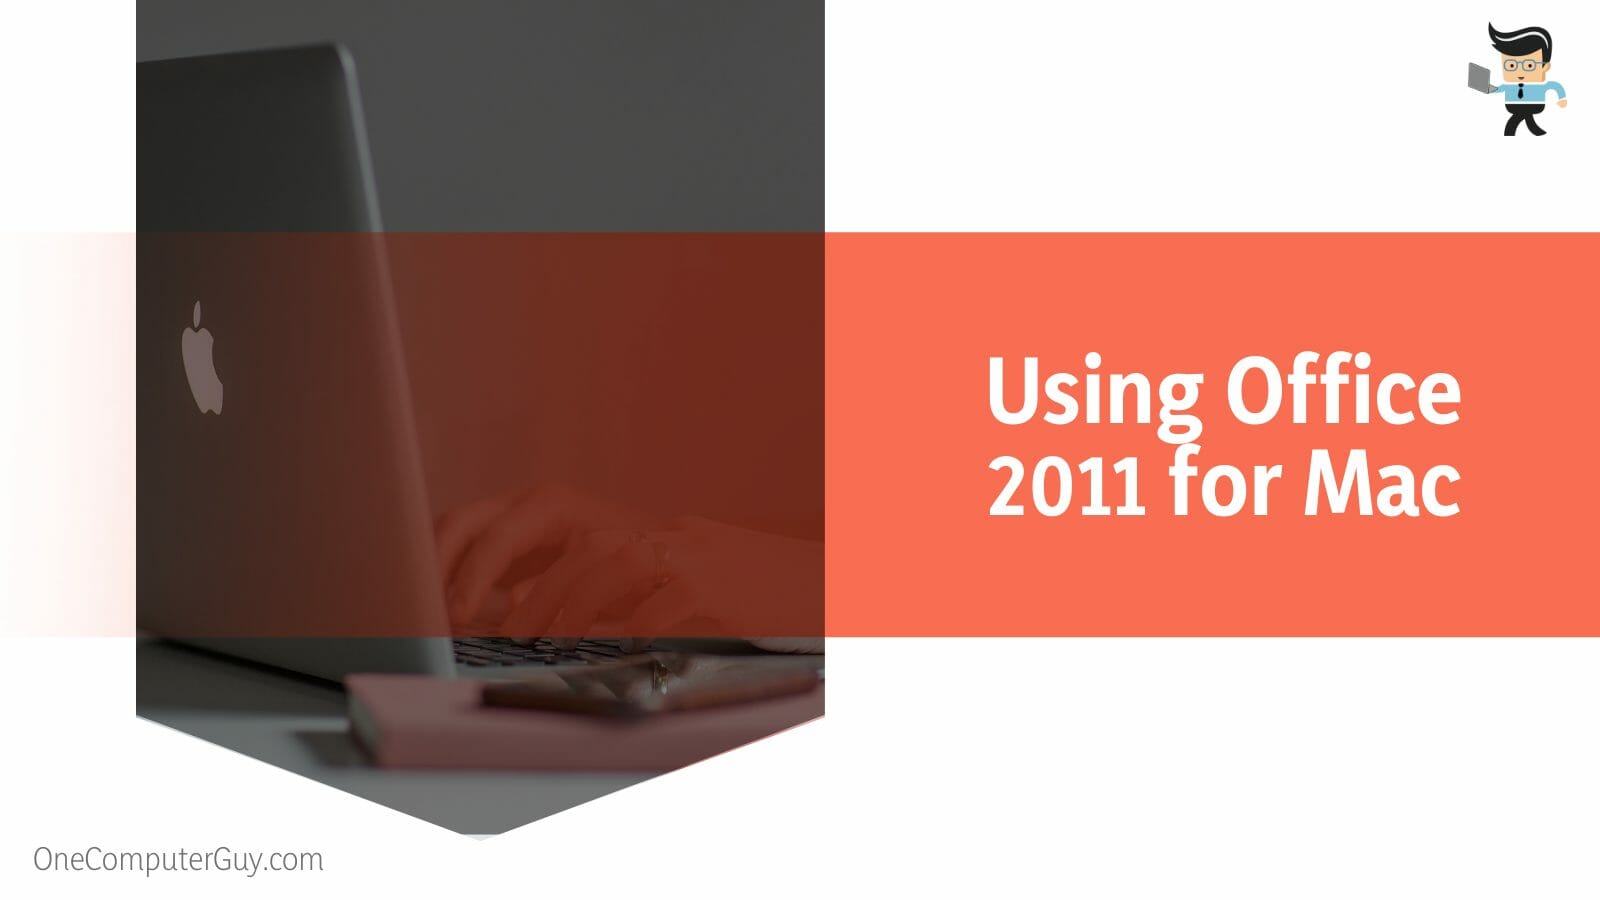 Using Office 2011 for Mac